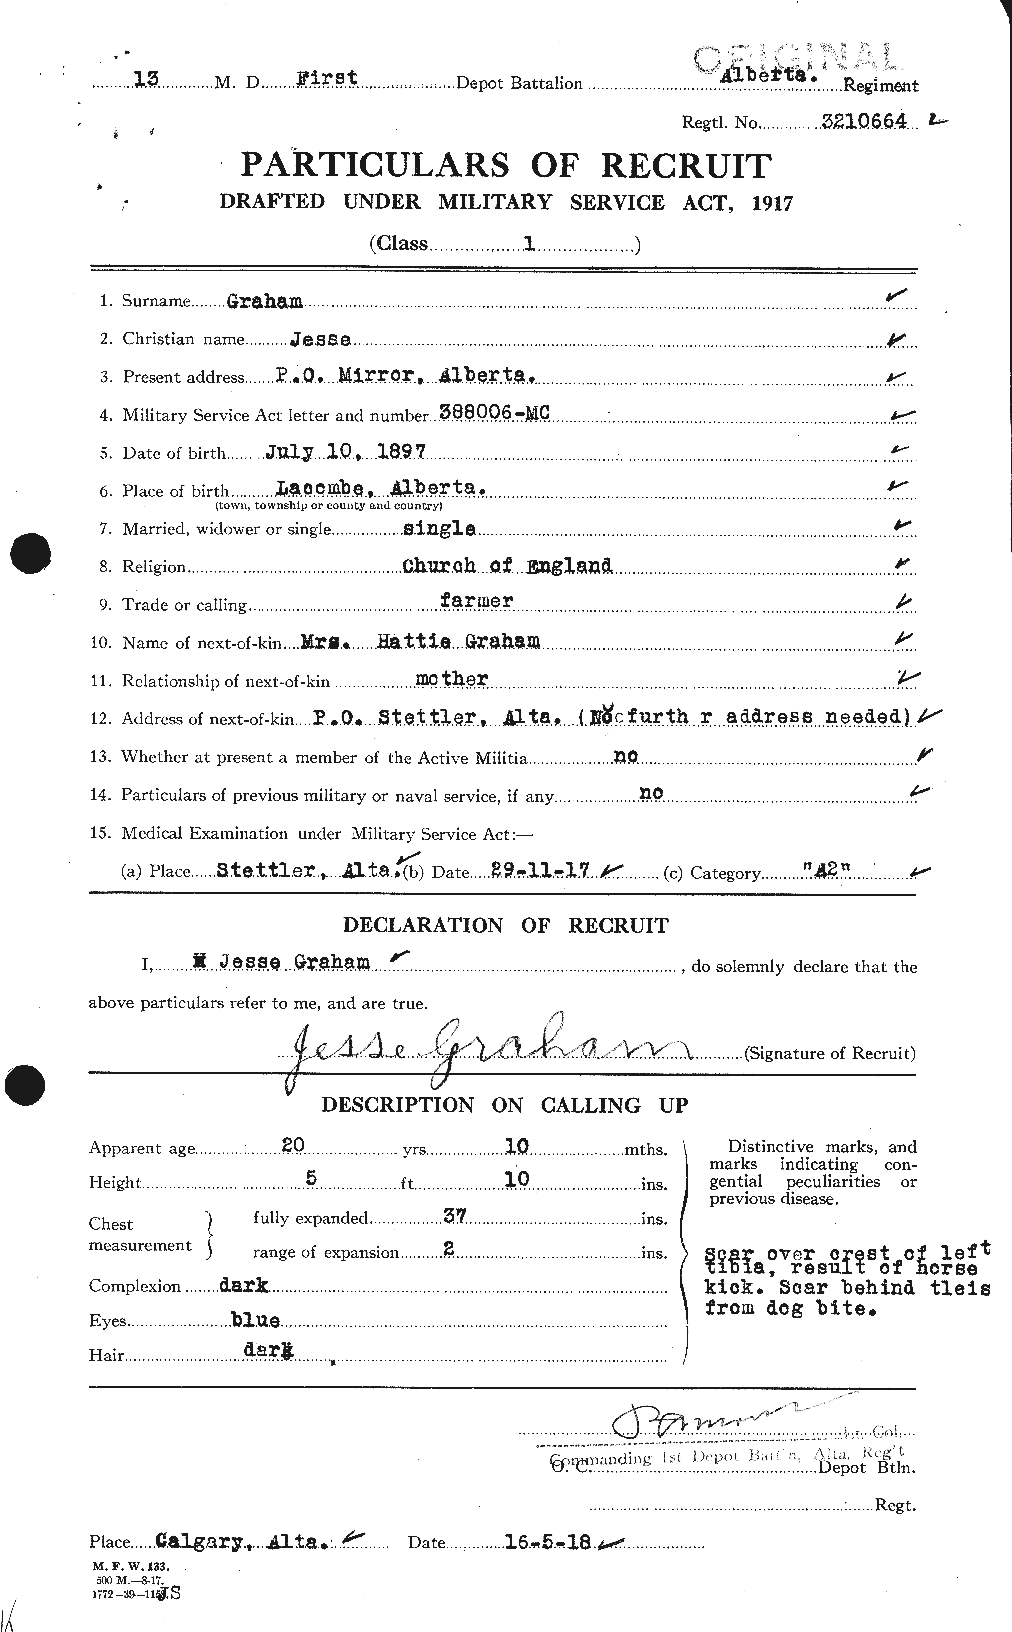 Personnel Records of the First World War - CEF 359104a